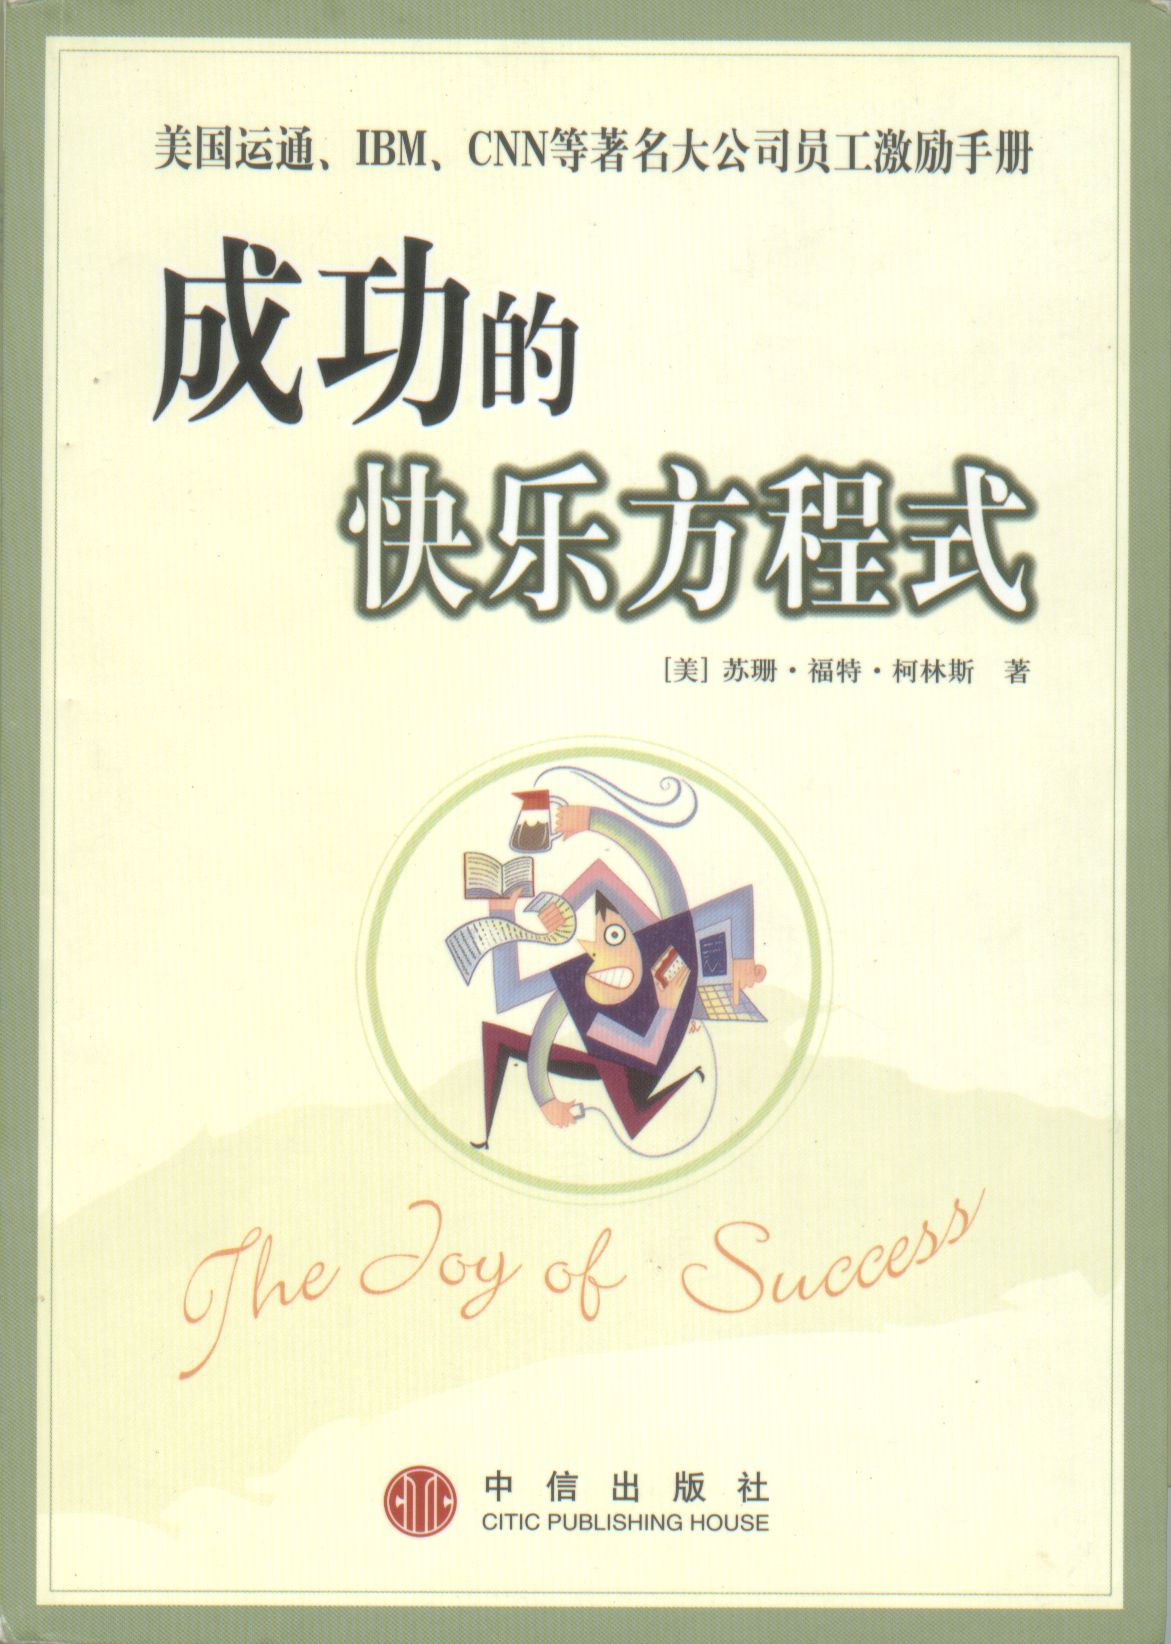 Copy of The Joy of Success in Chinese